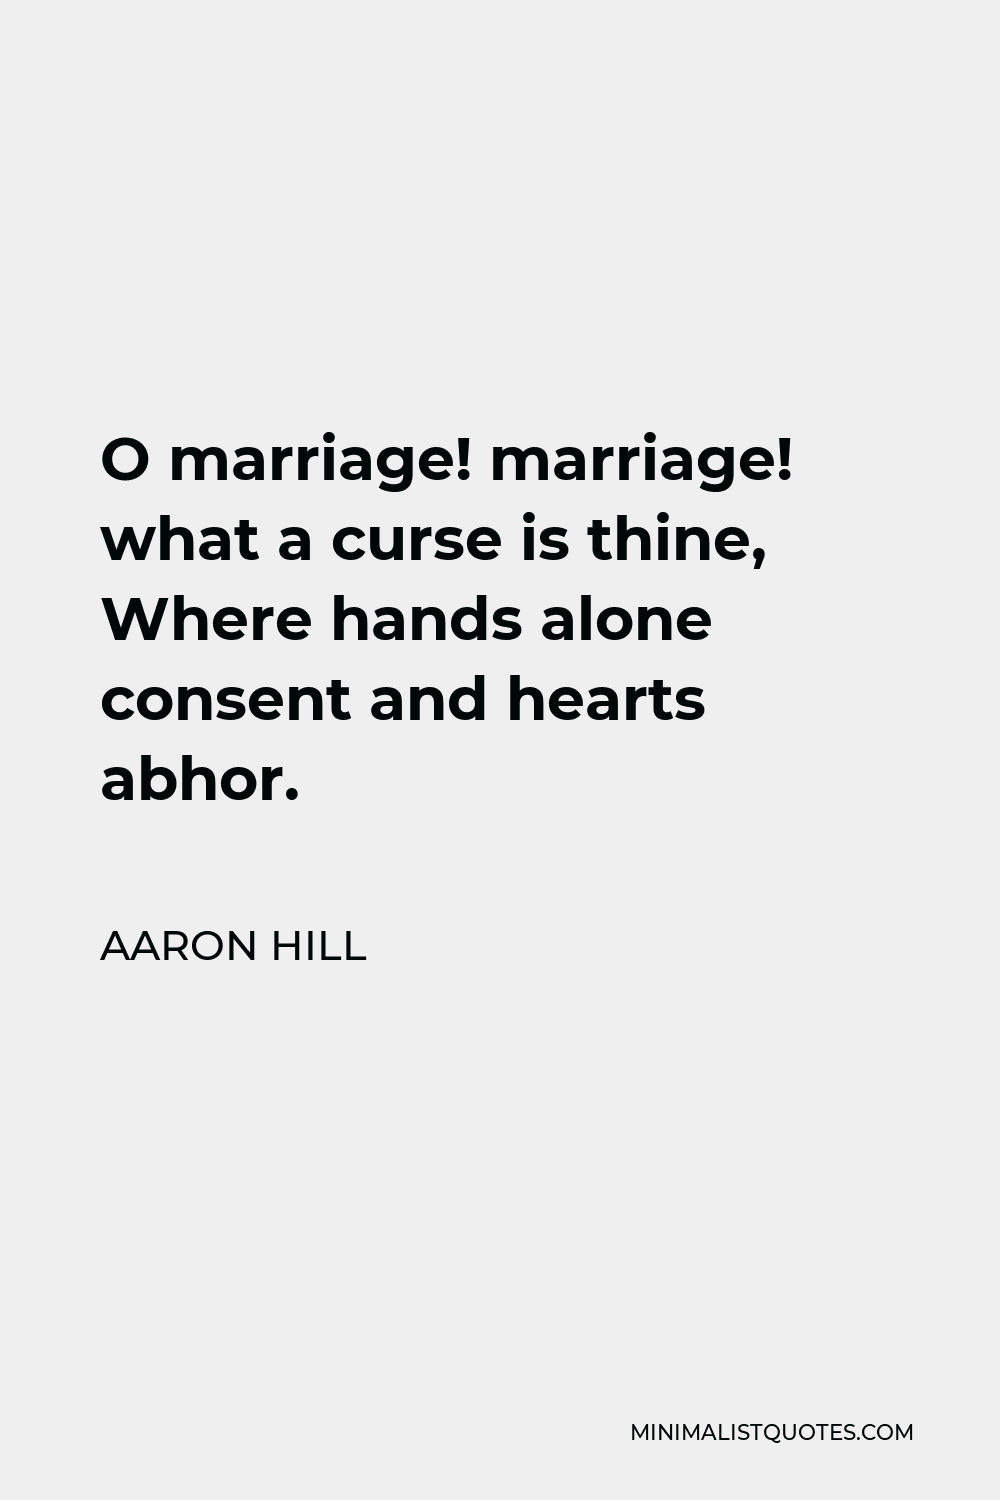 Aaron Hill Quote - O marriage! marriage! what a curse is thine, Where hands alone consent and hearts abhor.